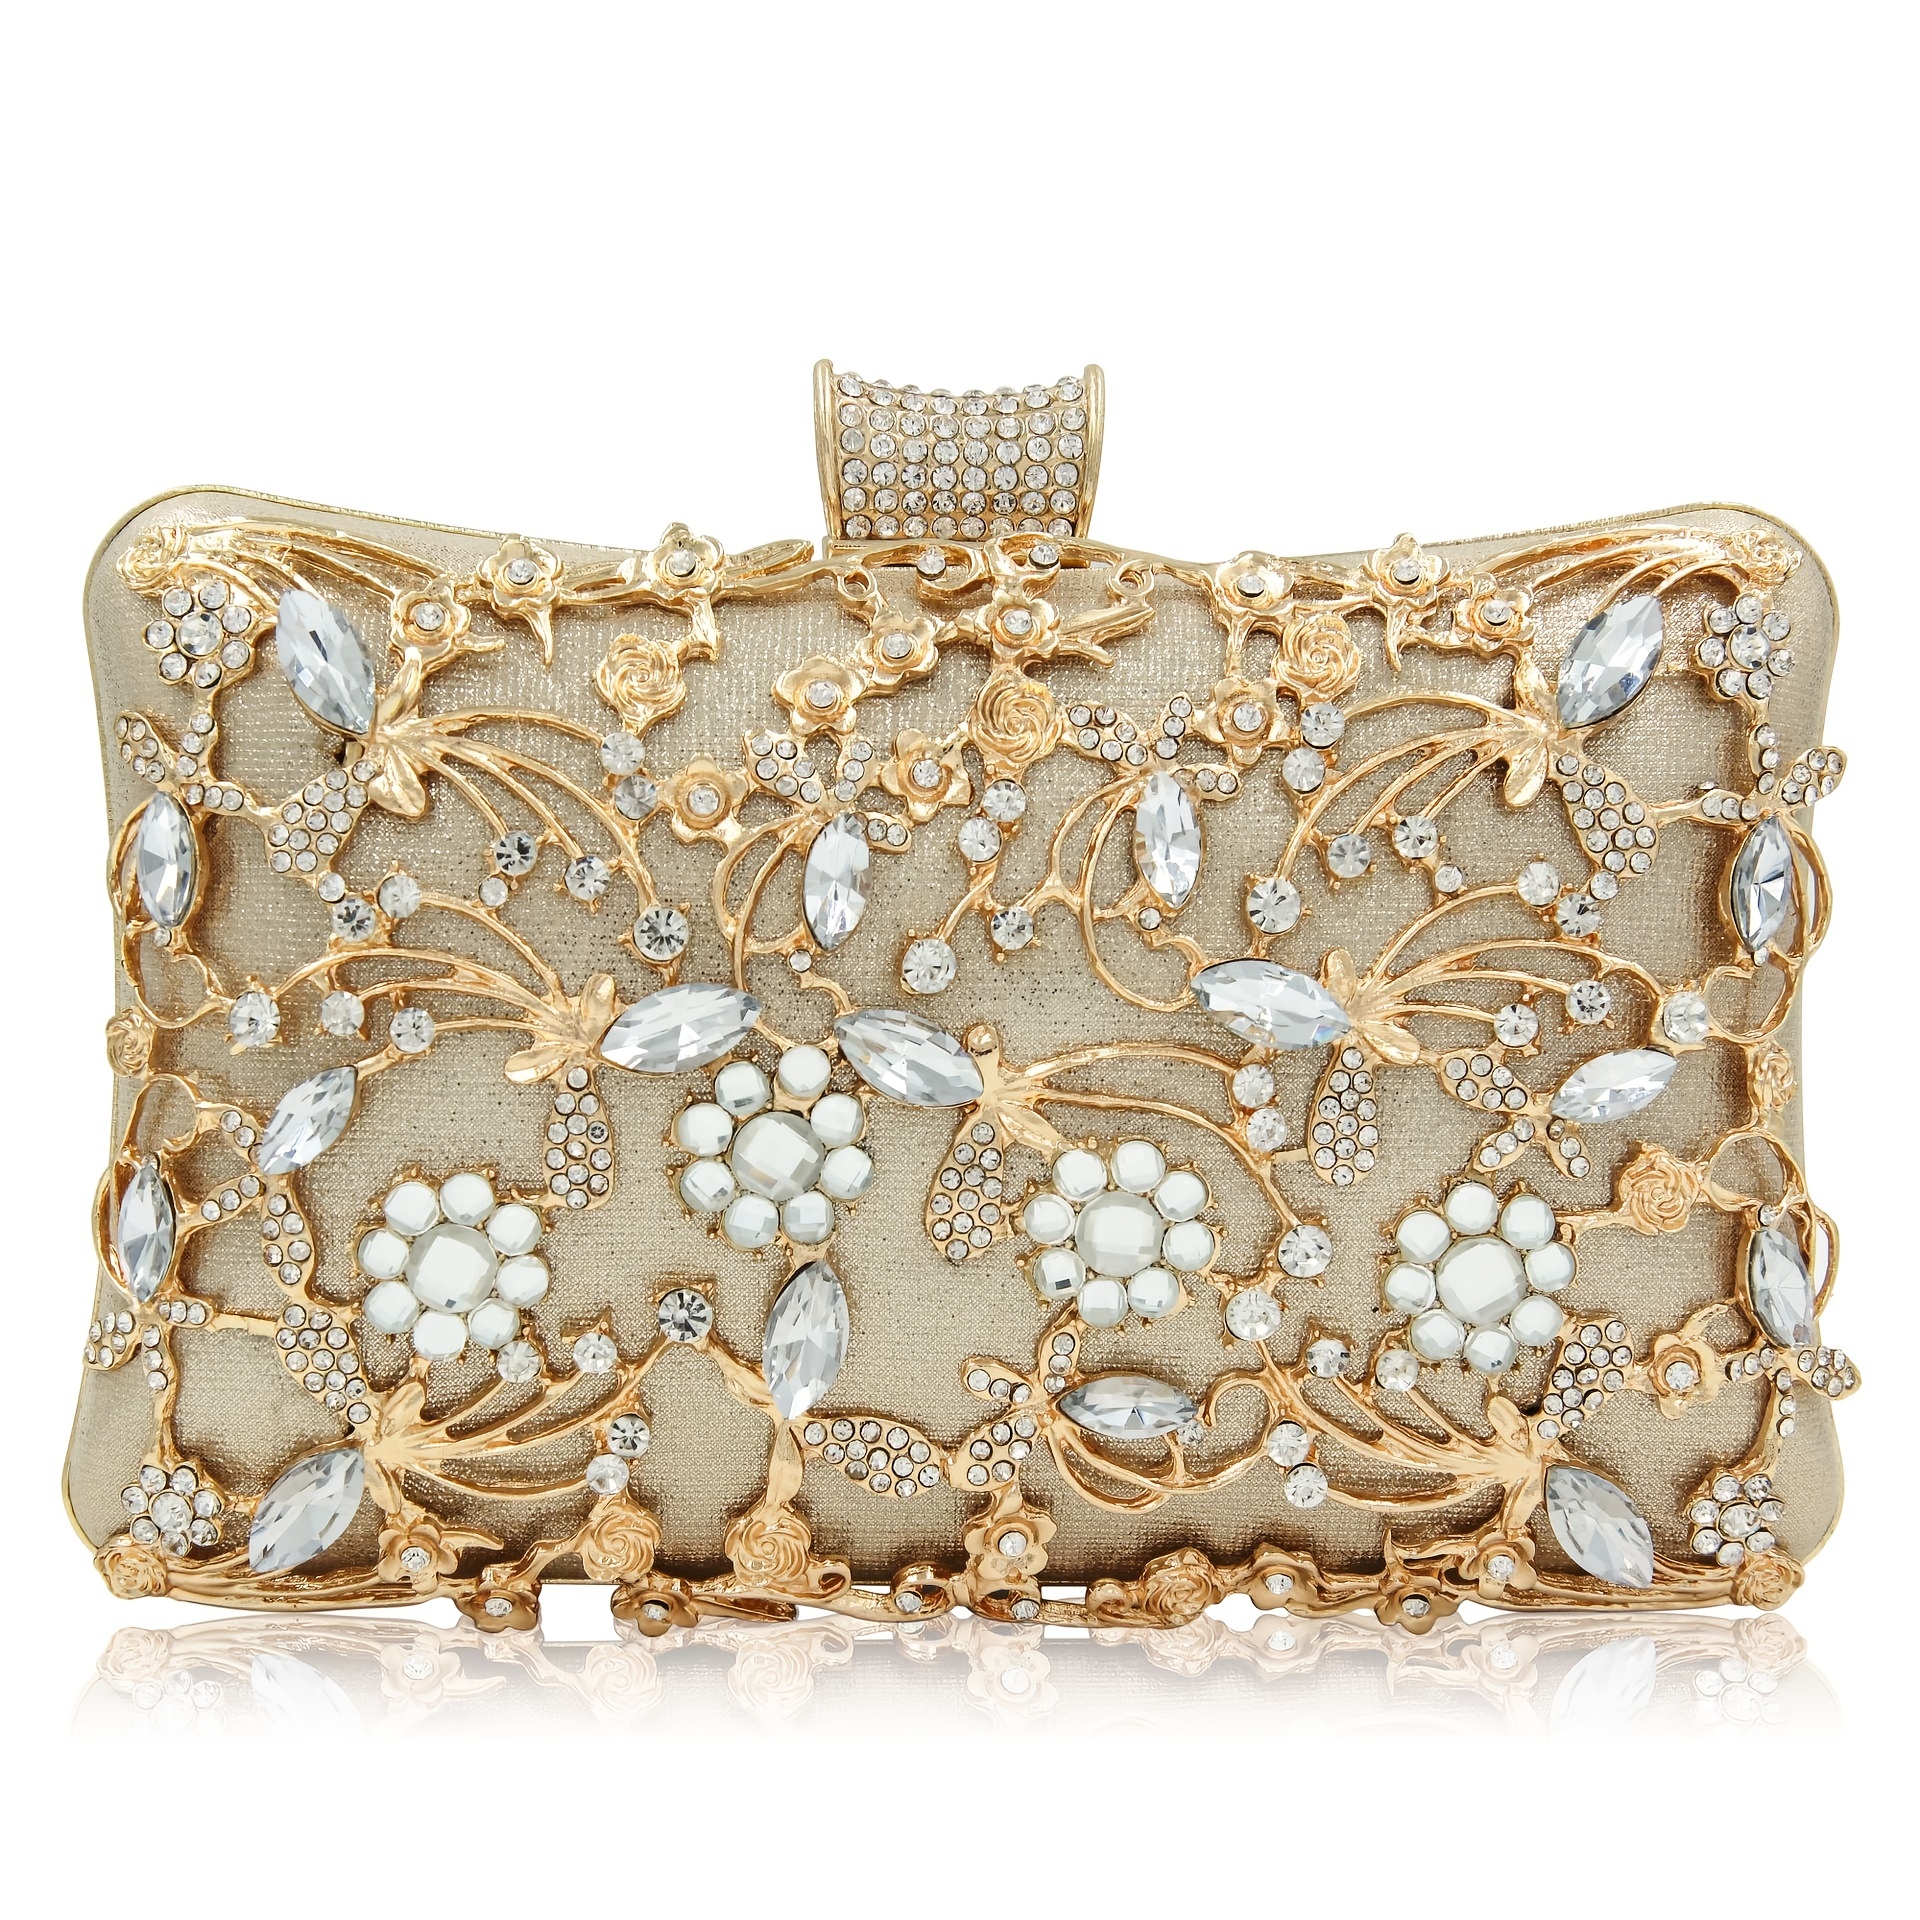 Rhinestone Luxury Clutch Bag, Flower Pattern Evening Shoulder Bag With  Chain For Party & Dinner